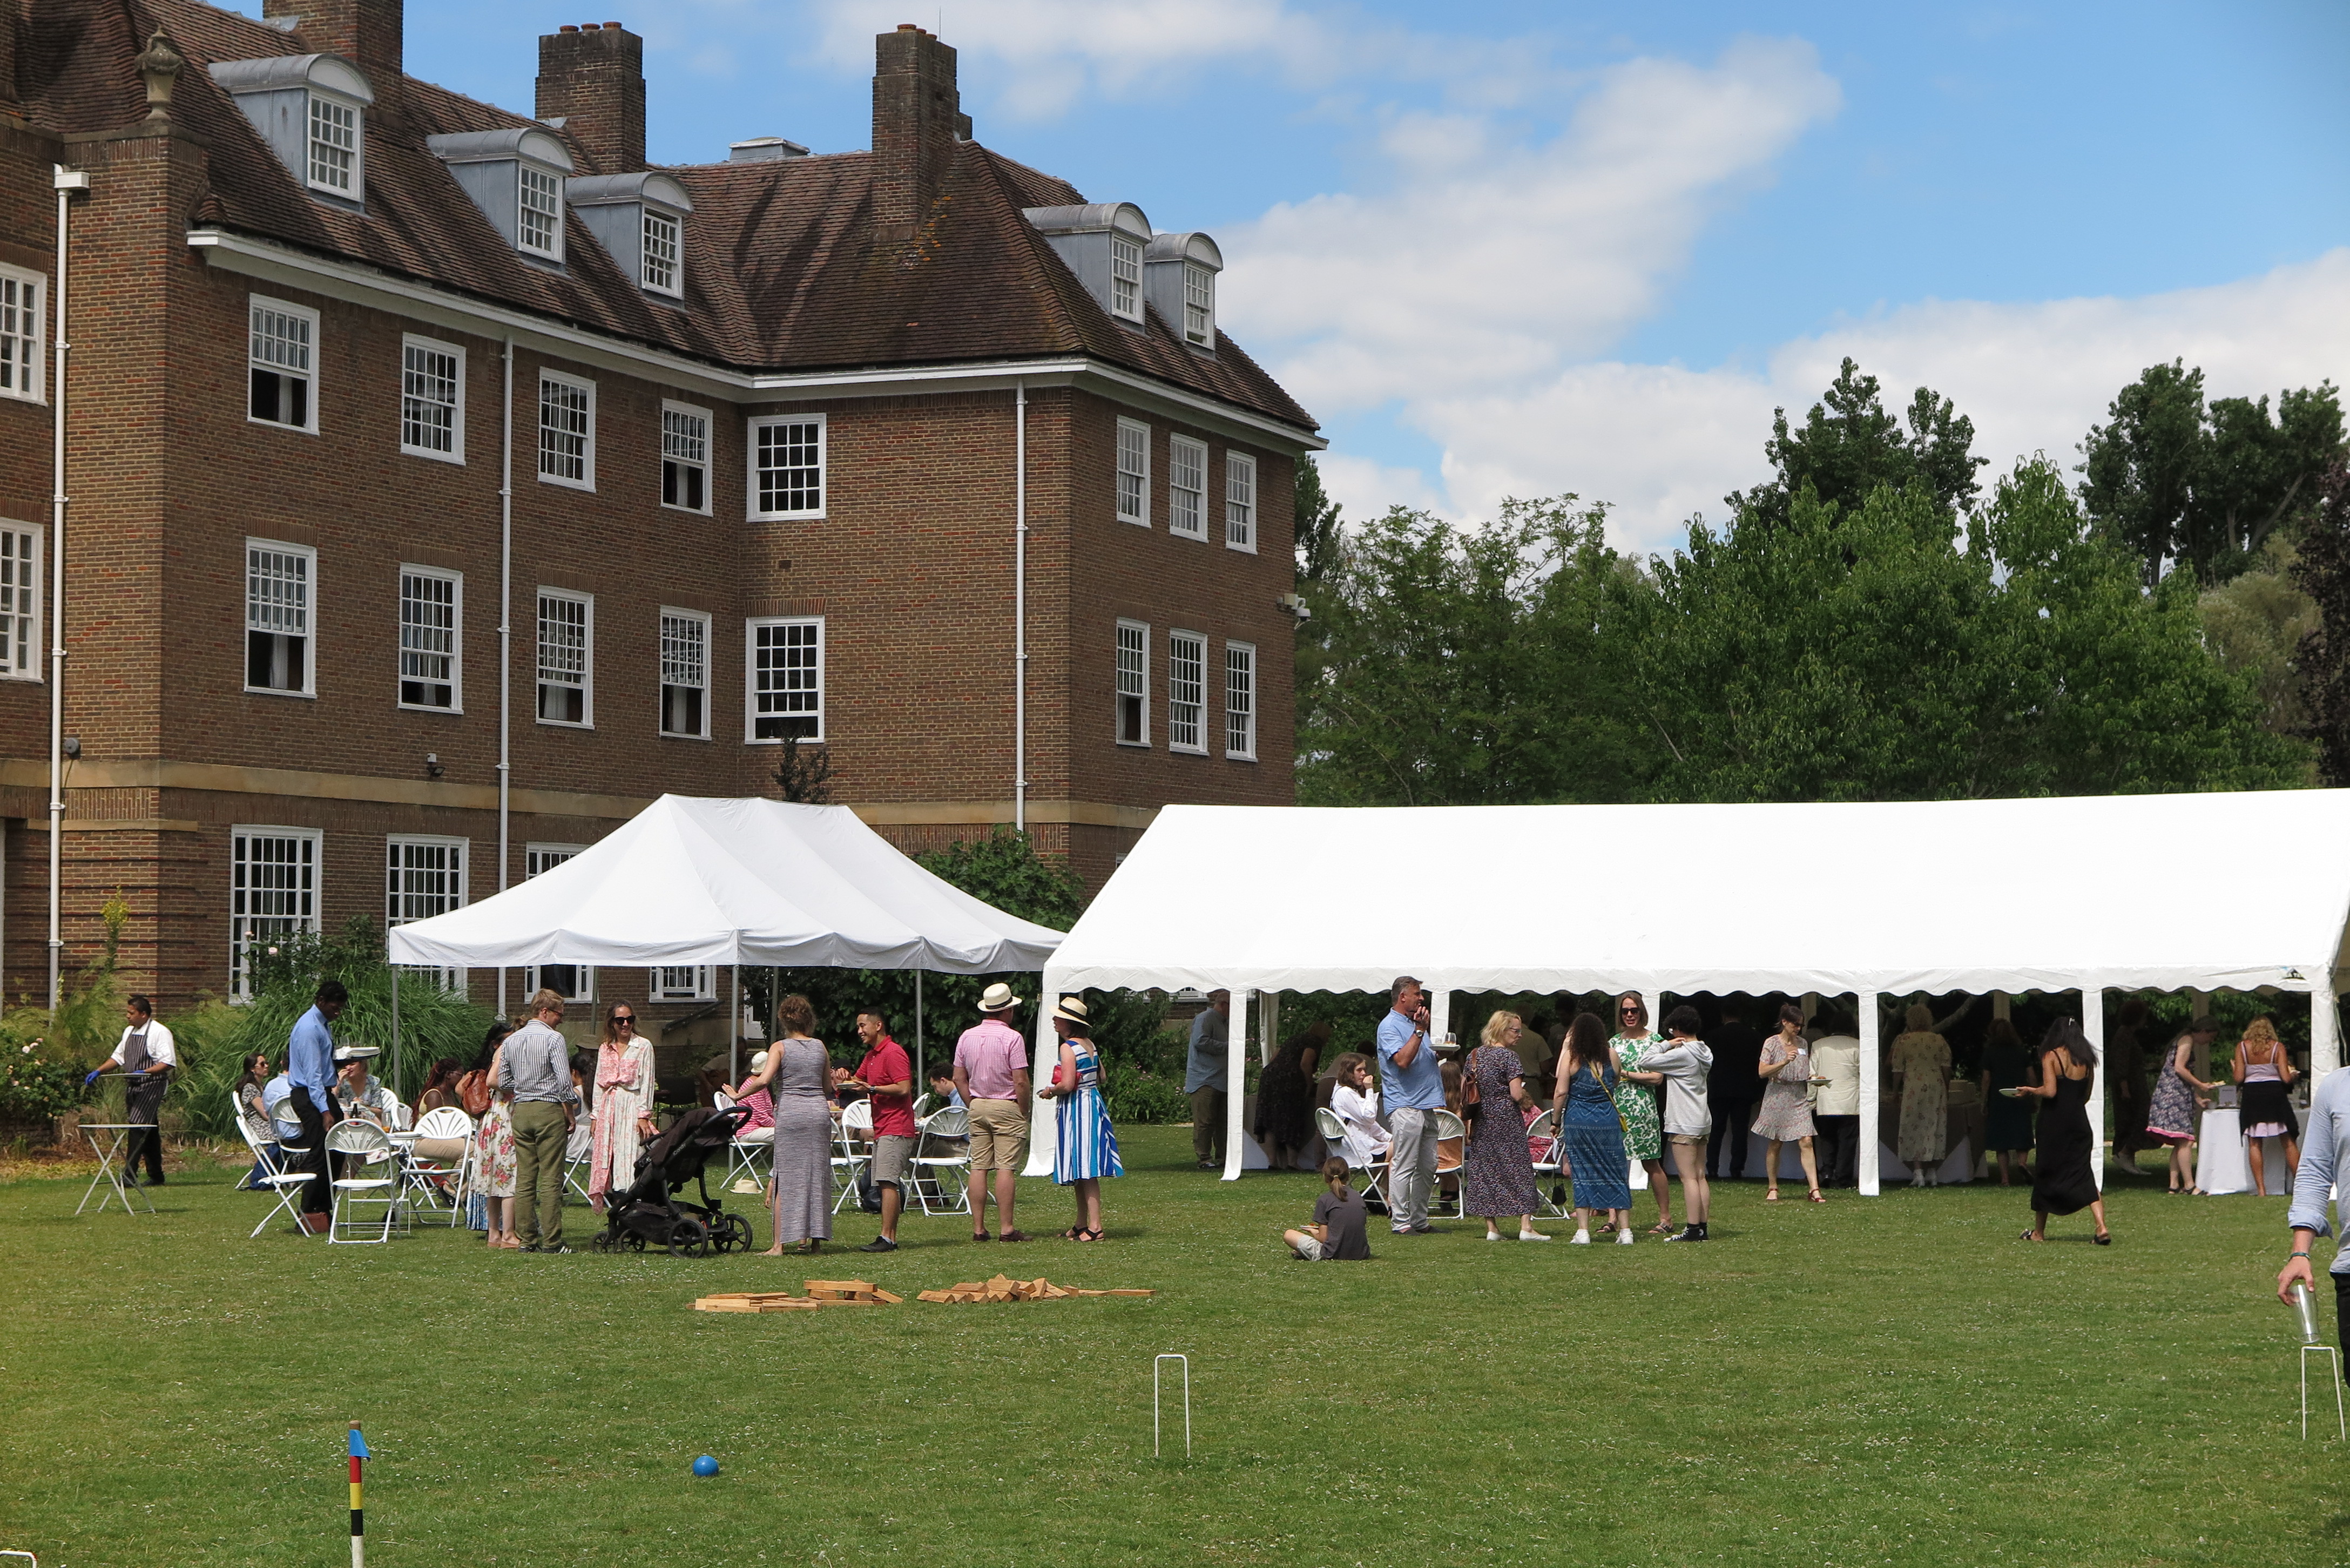 Photo of people gathered around a large white marquee on a green lawn at a garden party